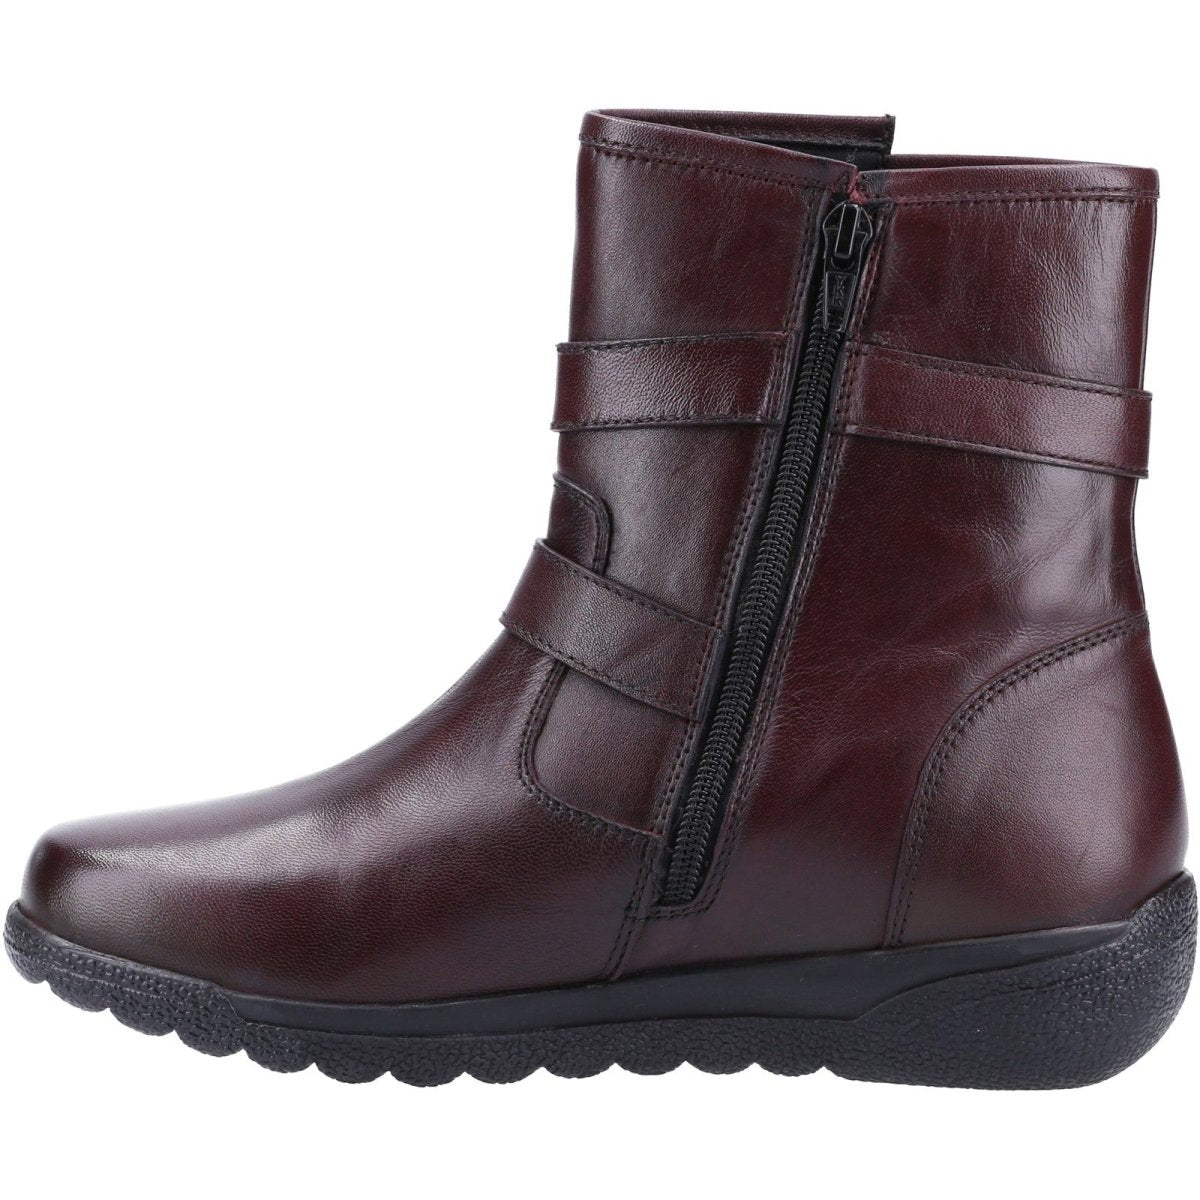 Fleet & Foster Zambia Leather Side-Zip Ladies Ankle Boots - Shoe Store Direct